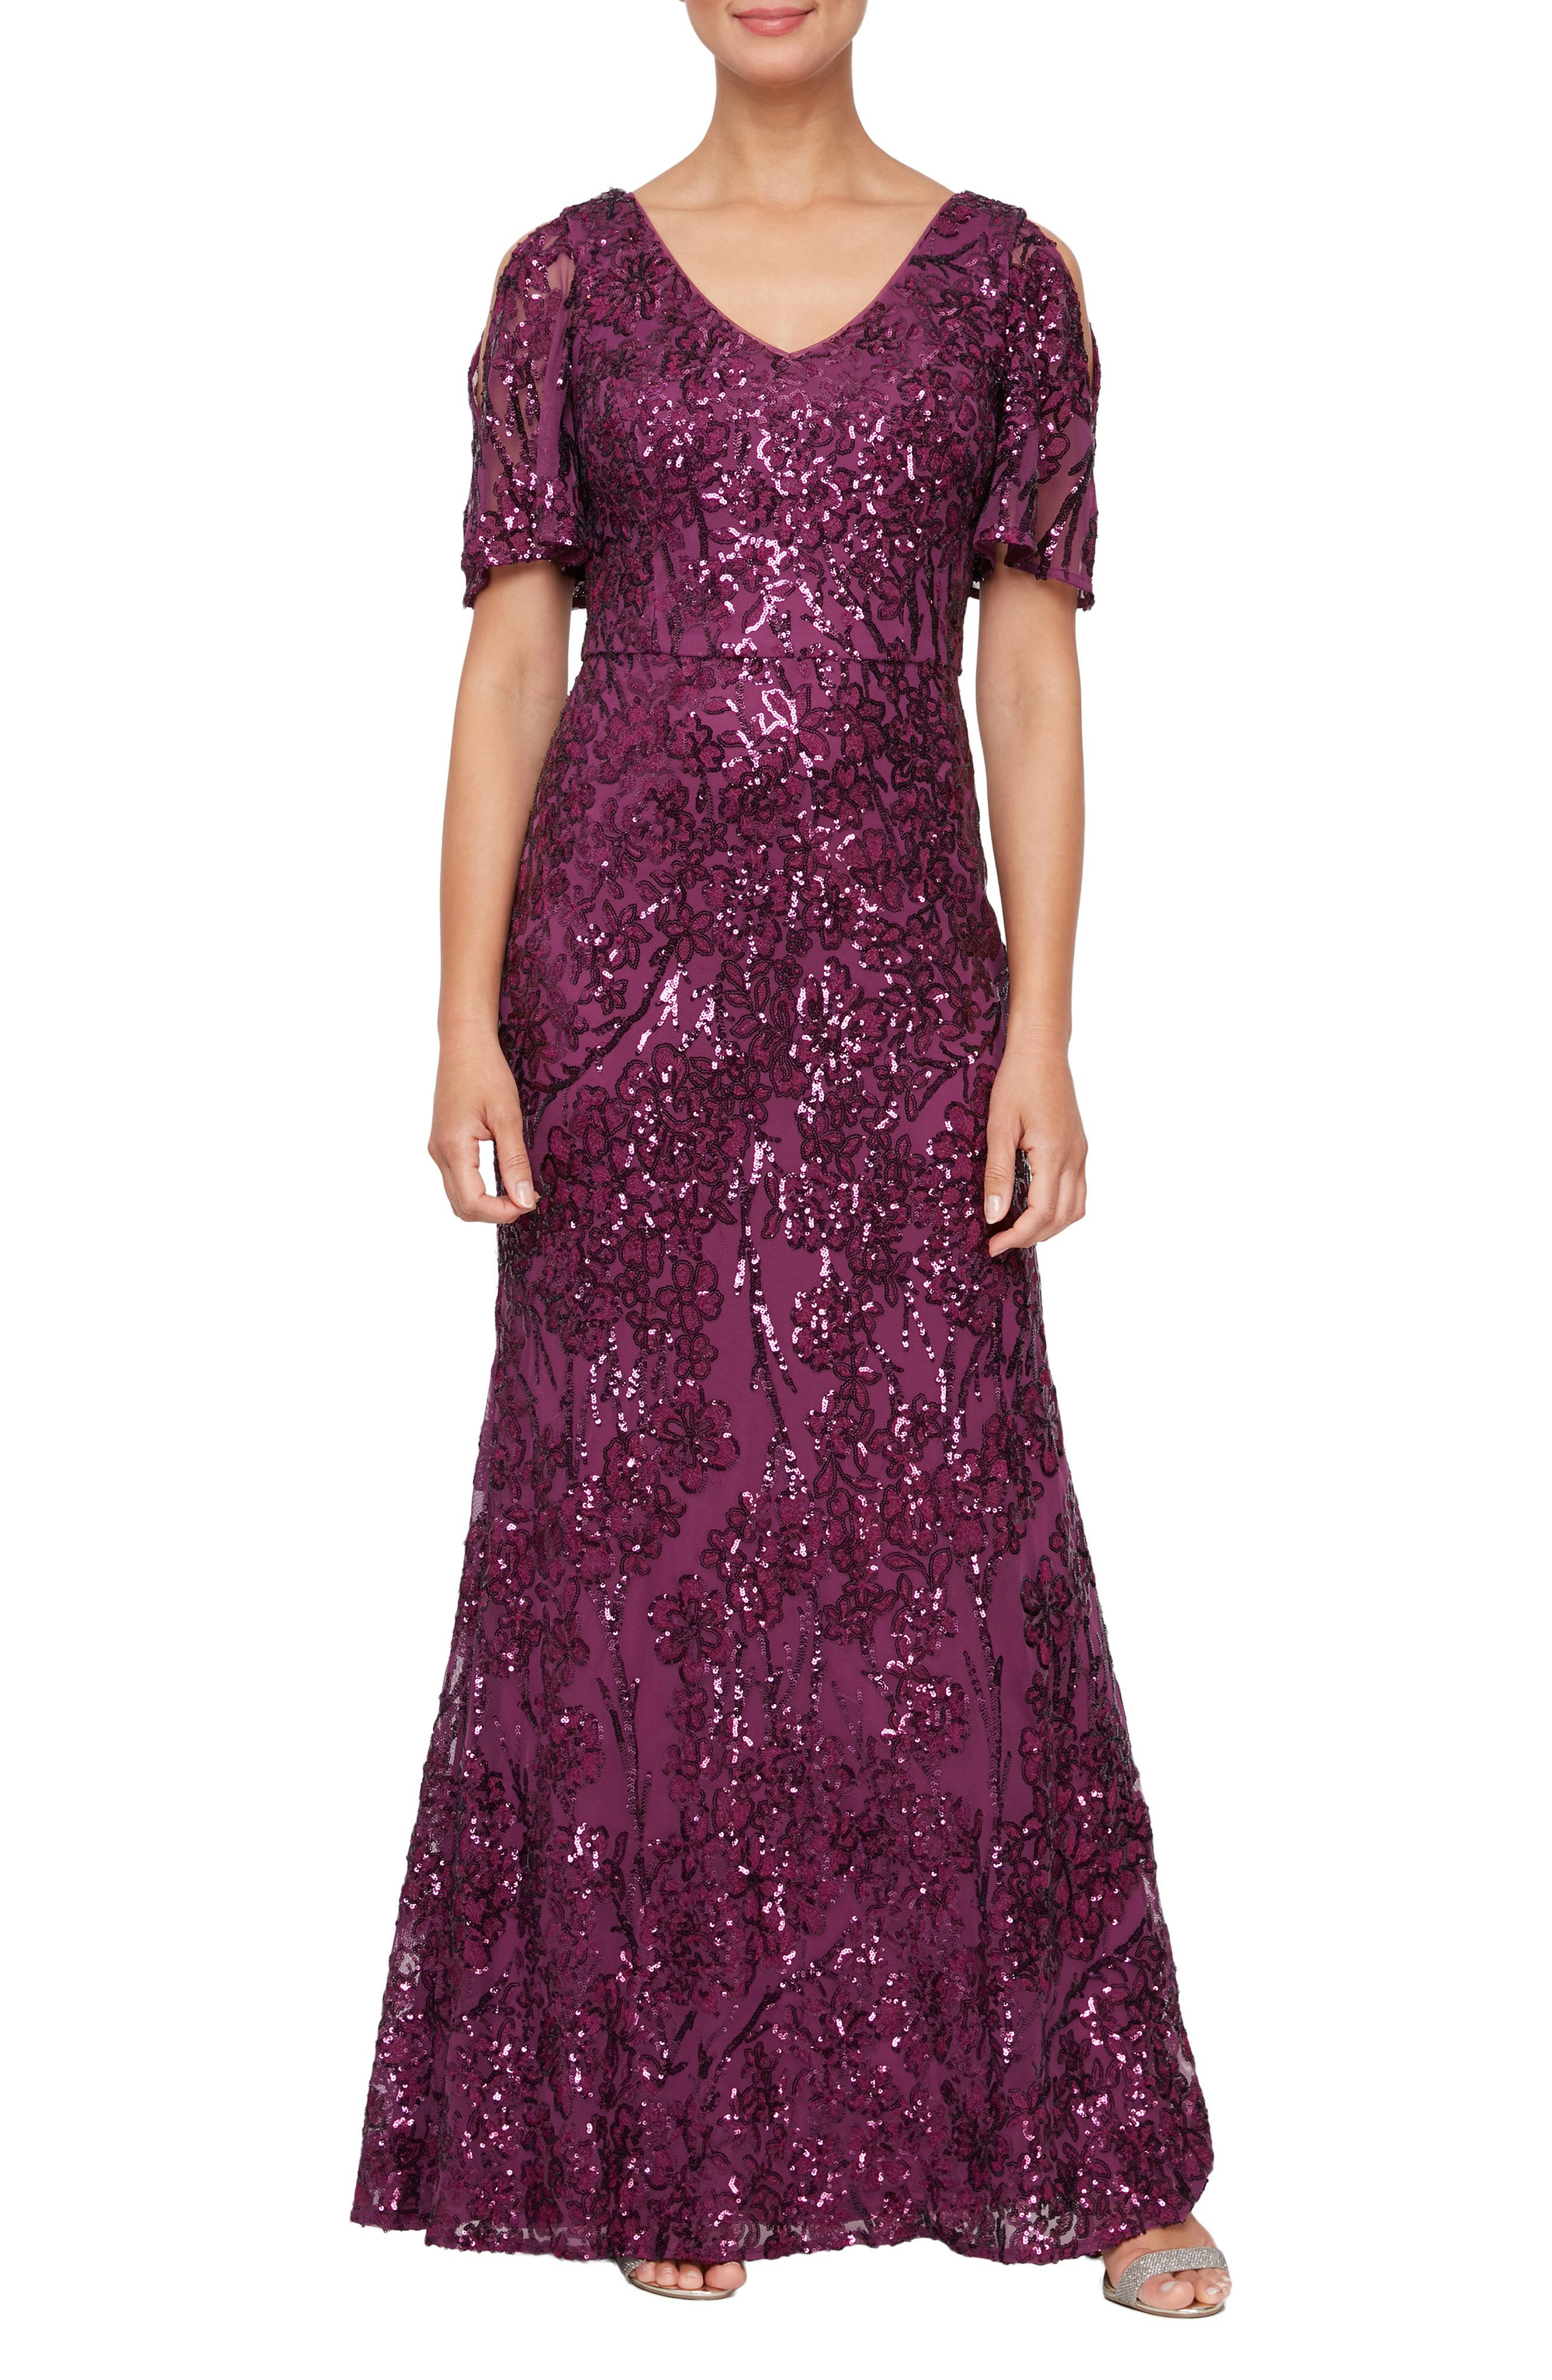 plum mother of the bride dresses